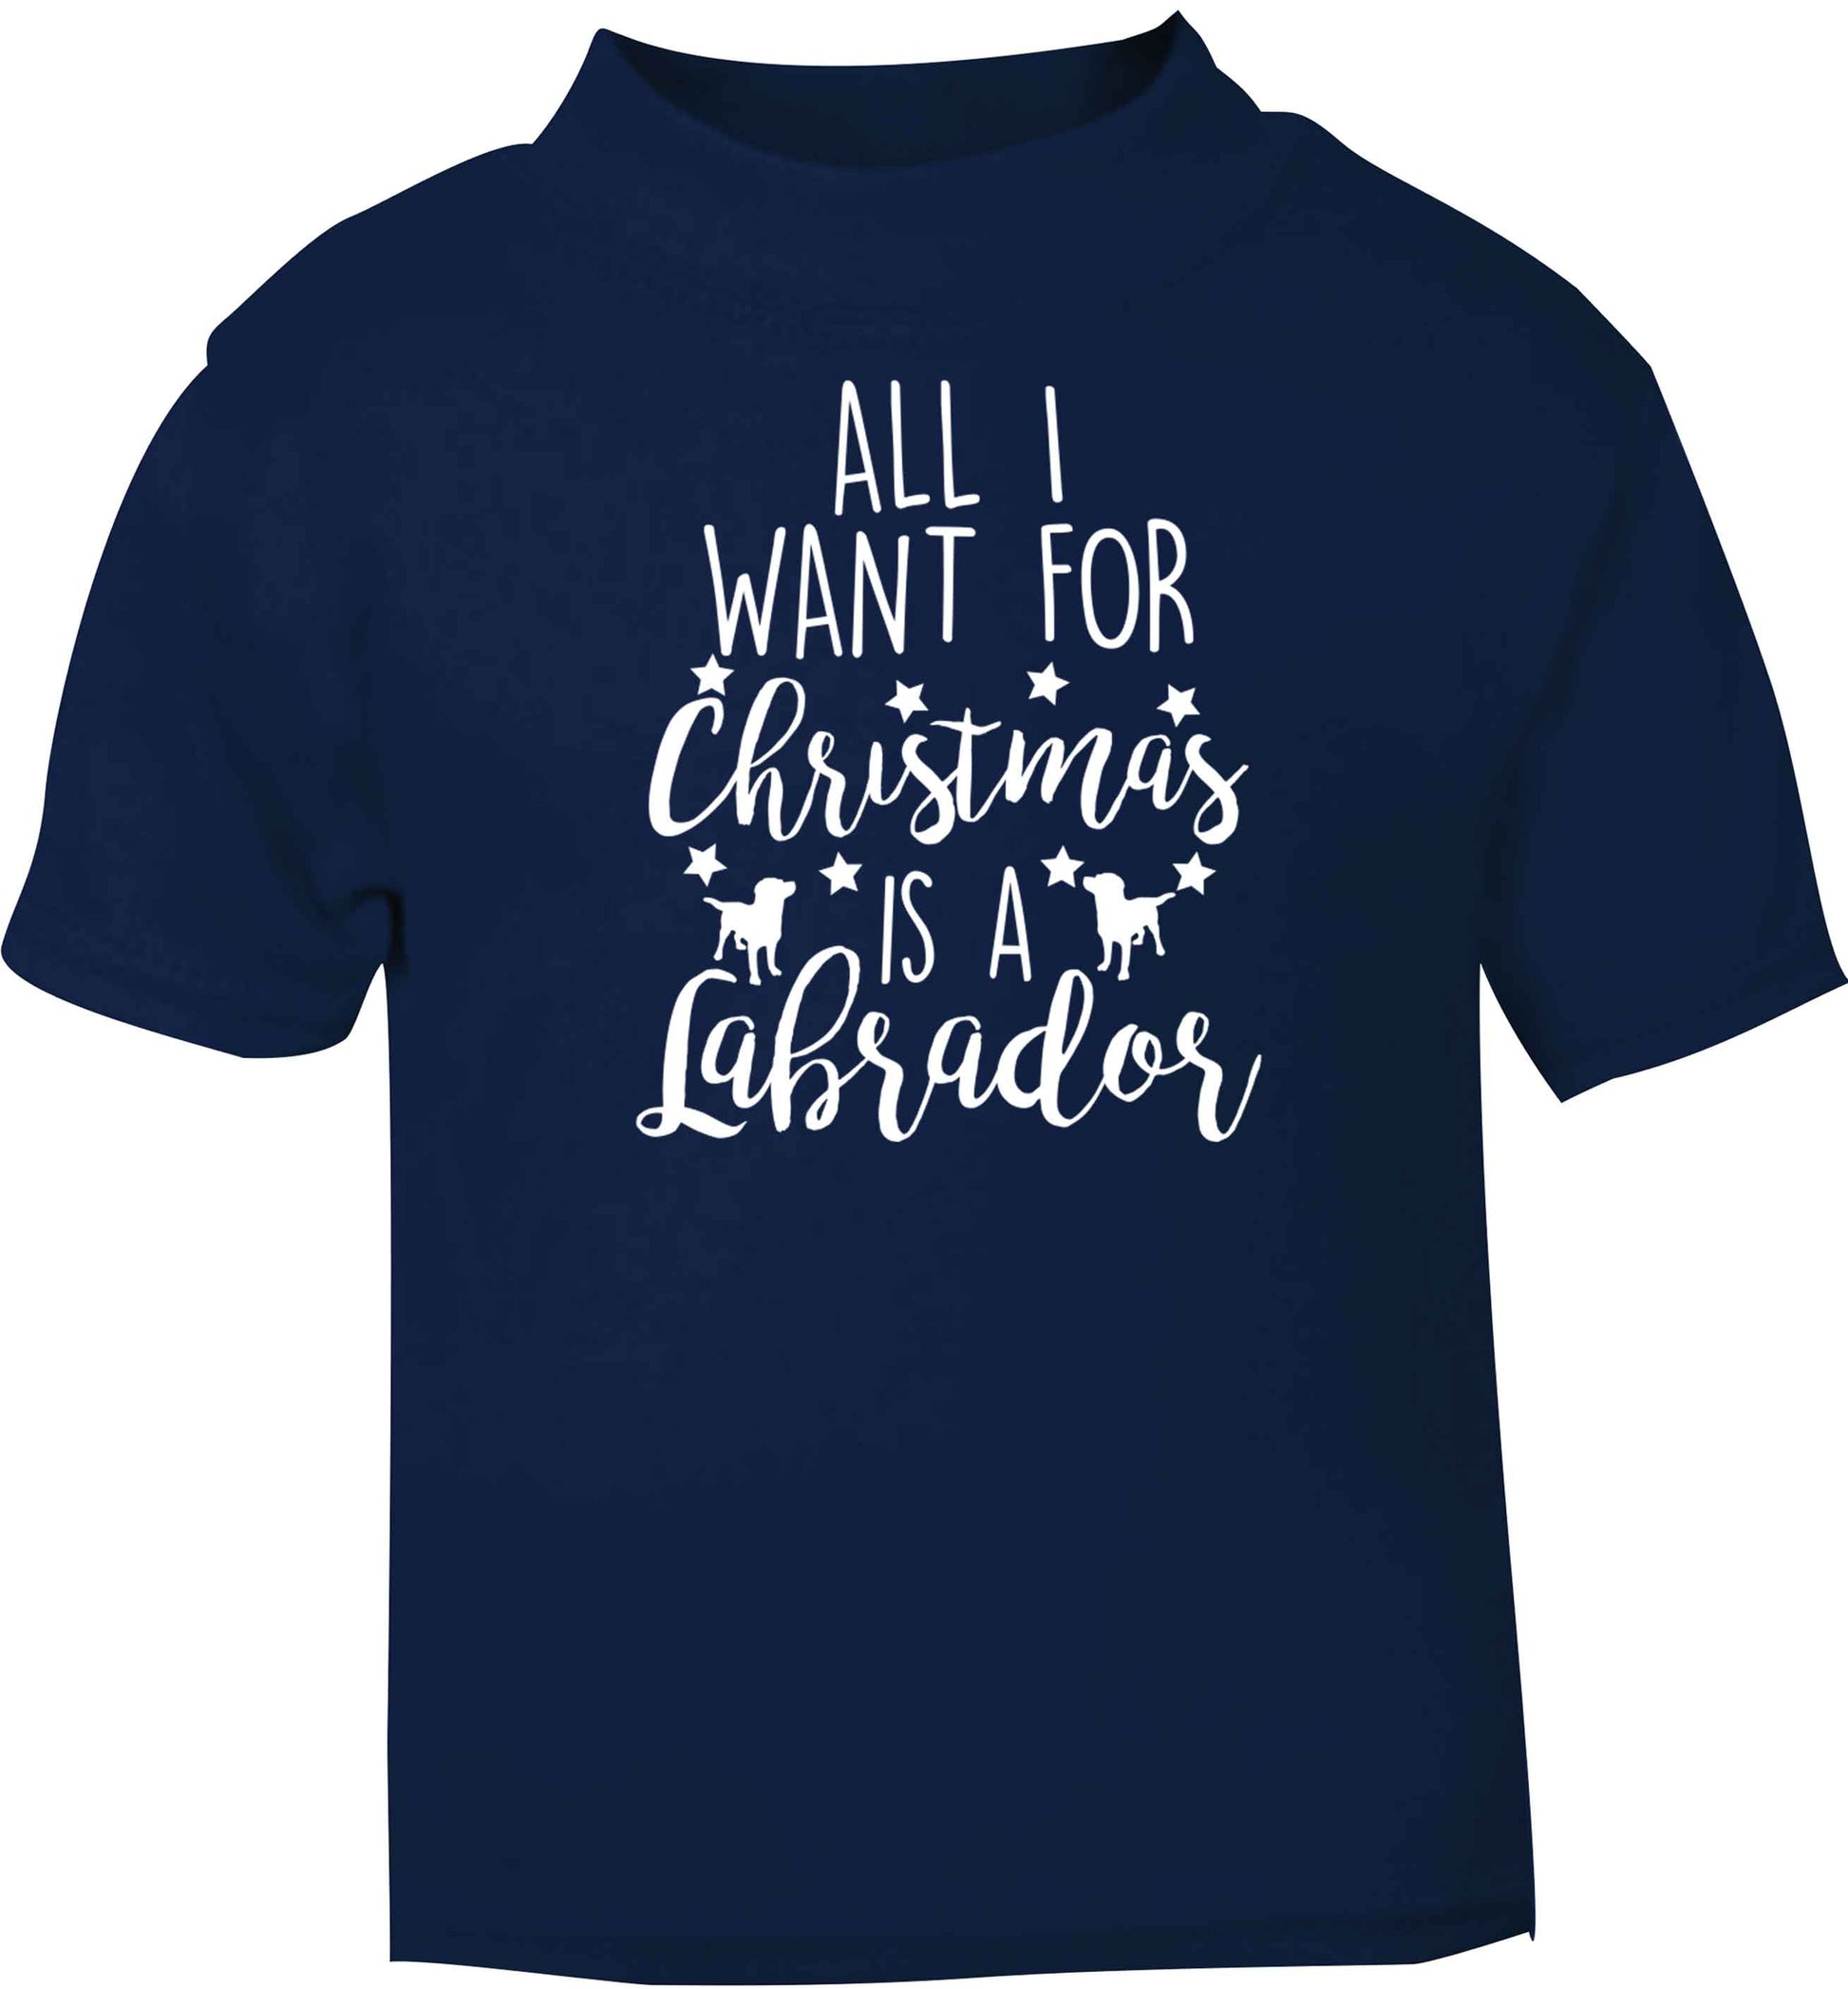 All I want for Christmas is a labrador navy baby toddler Tshirt 2 Years